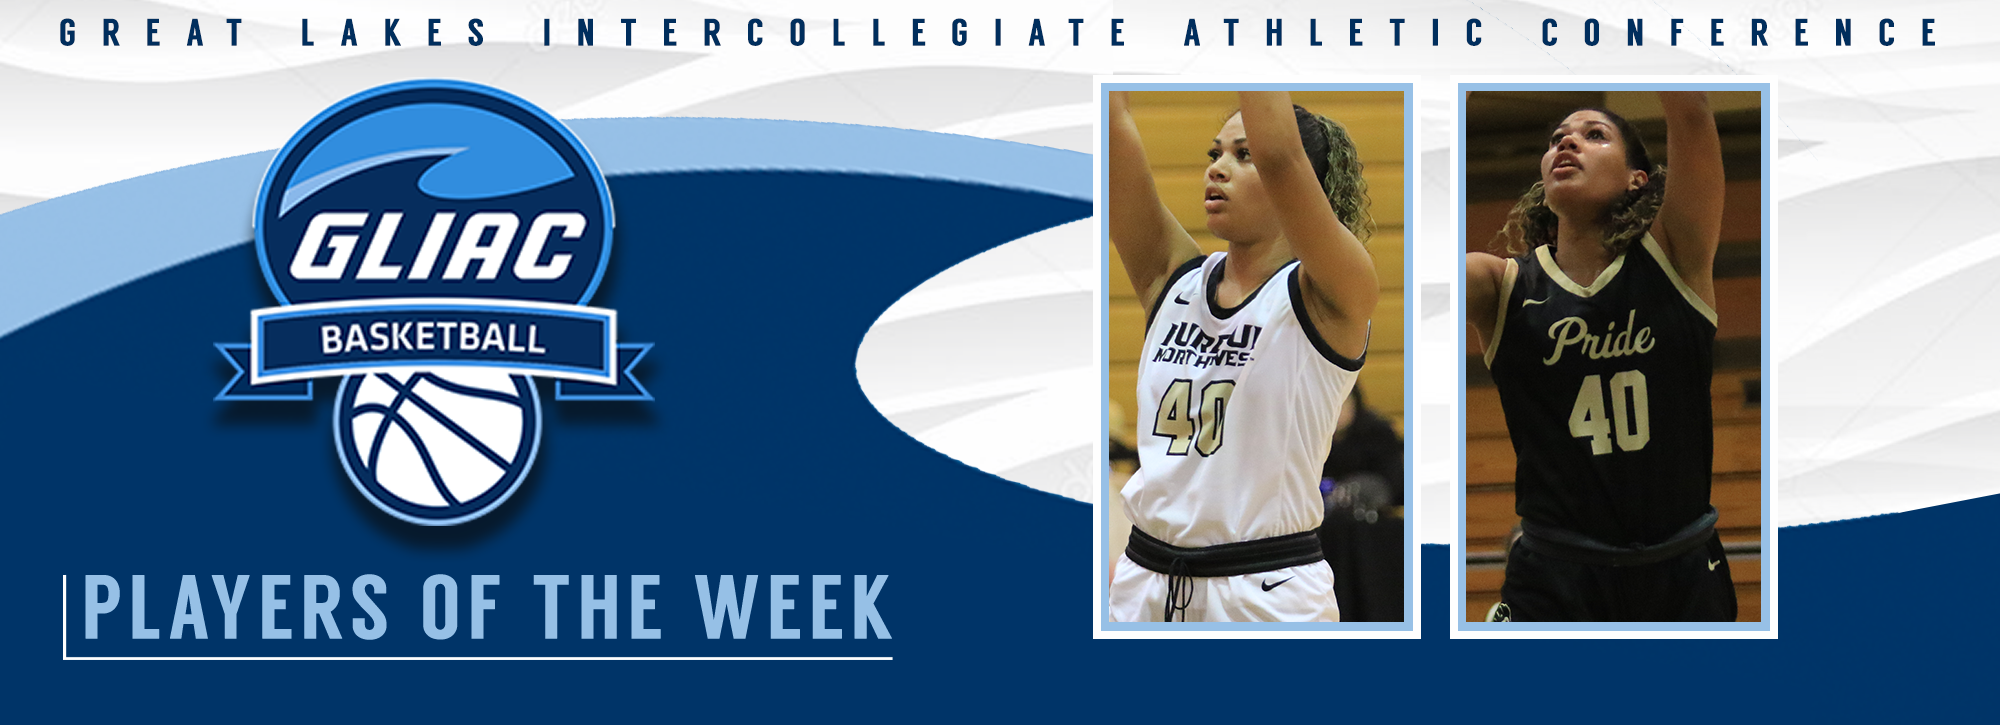 PNW's Simmons named GLIAC women's basketball player of the week